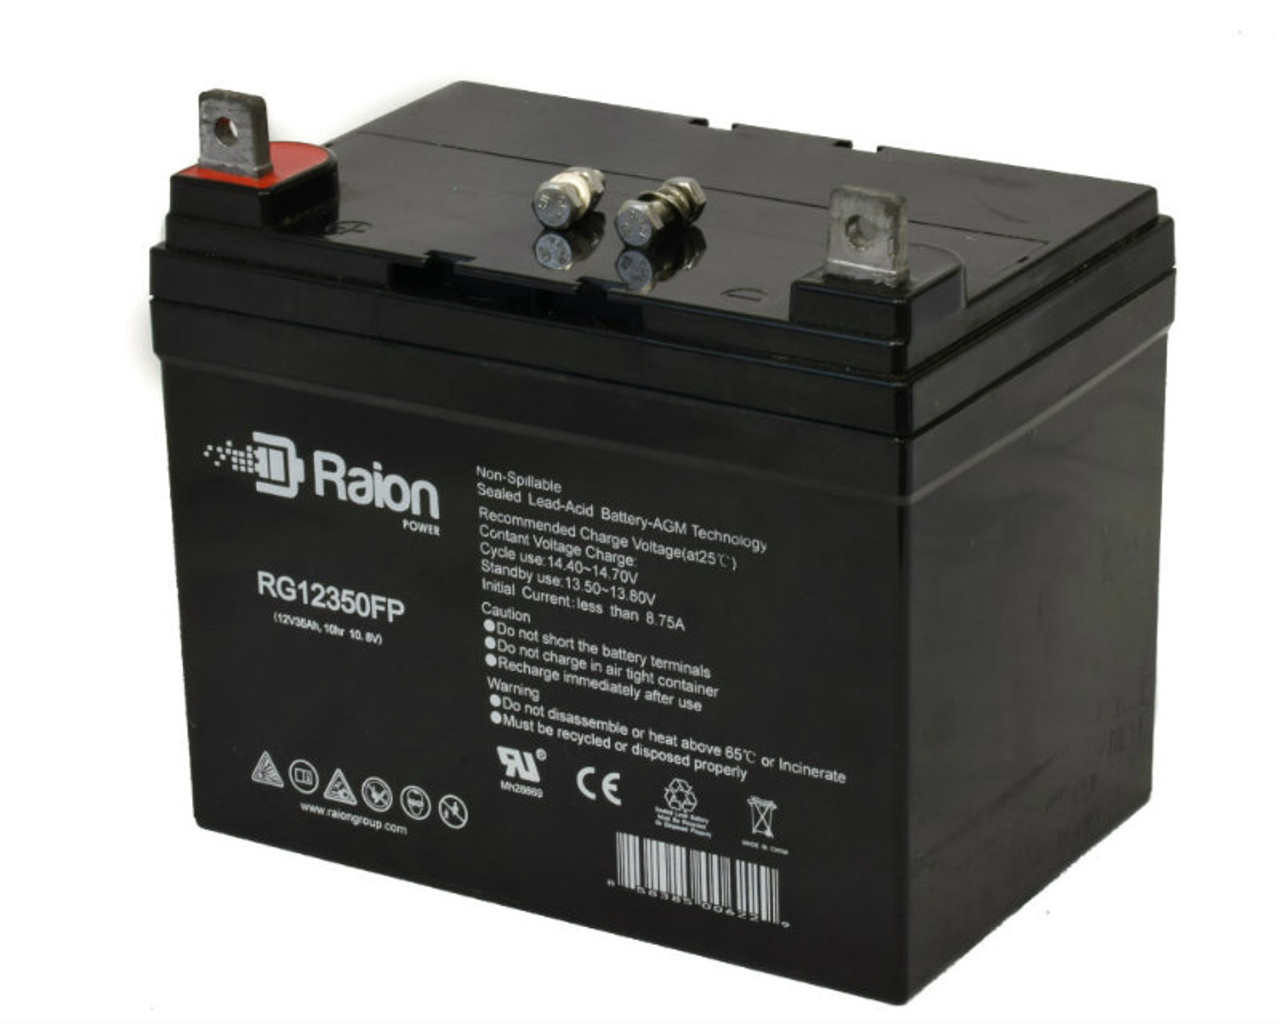 Raion Power Replacement 12V 35Ah RG12350FP Battery for National Power GT200S5RG12350FP